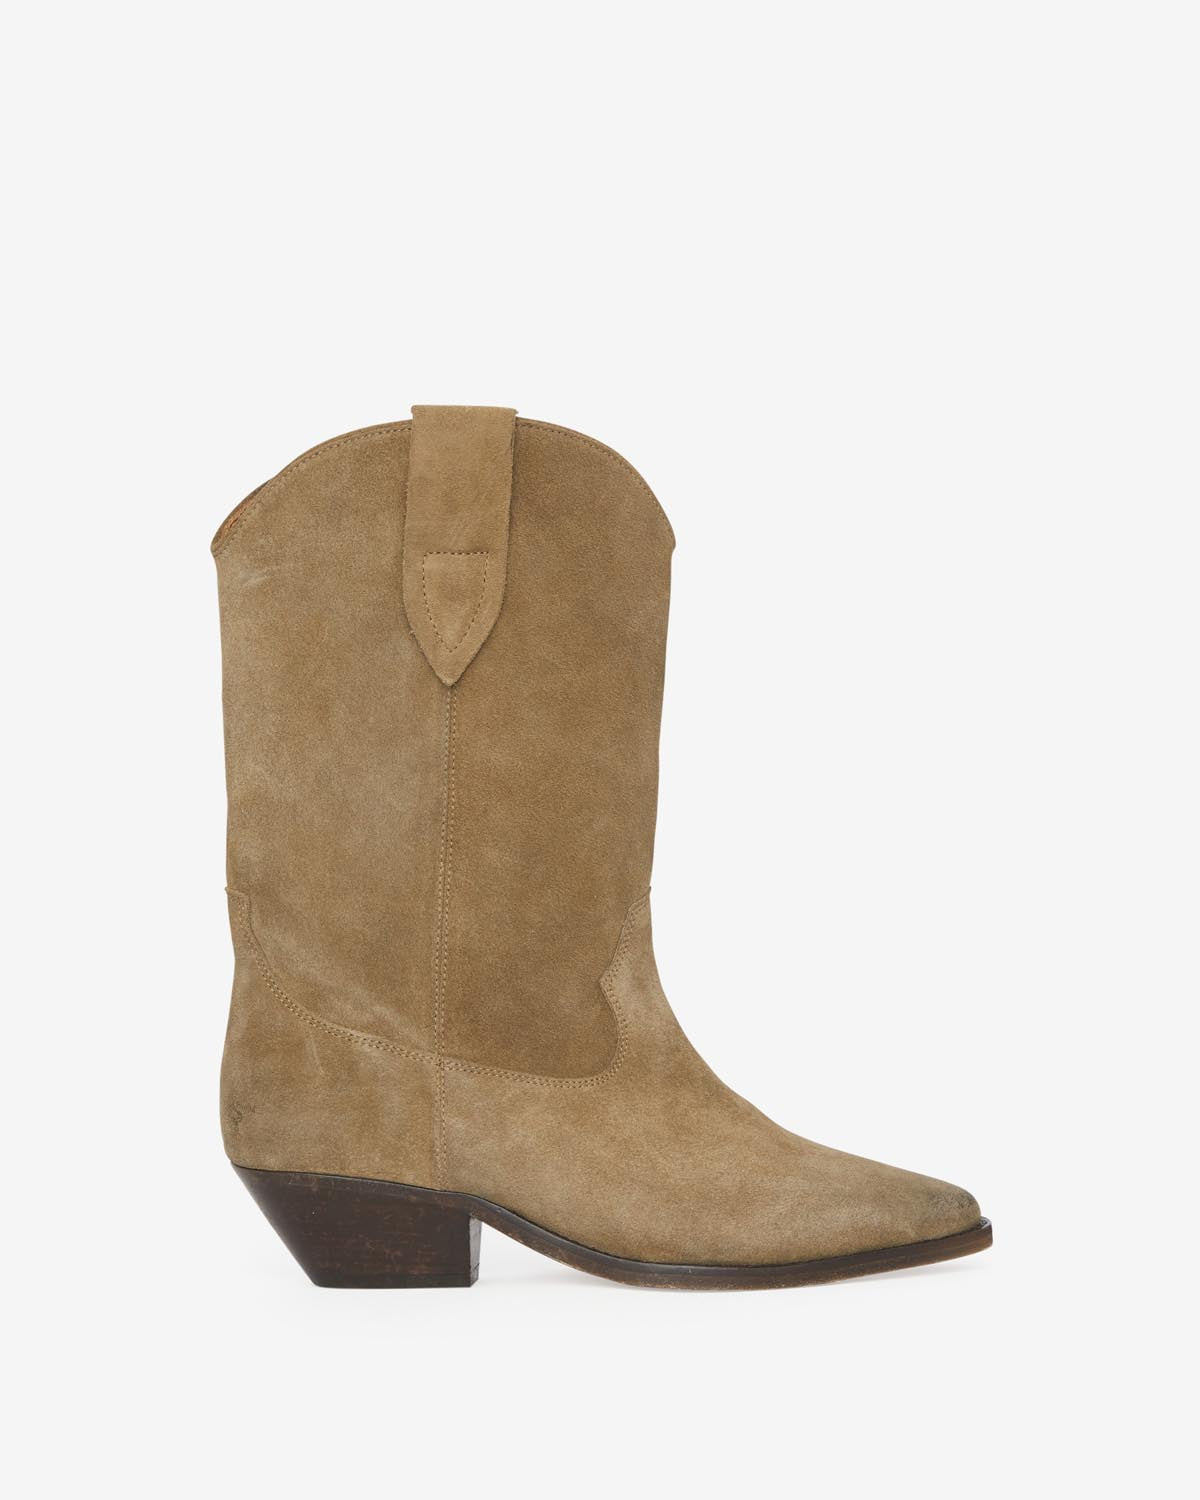 Stiefel duerto Woman Taupe 6